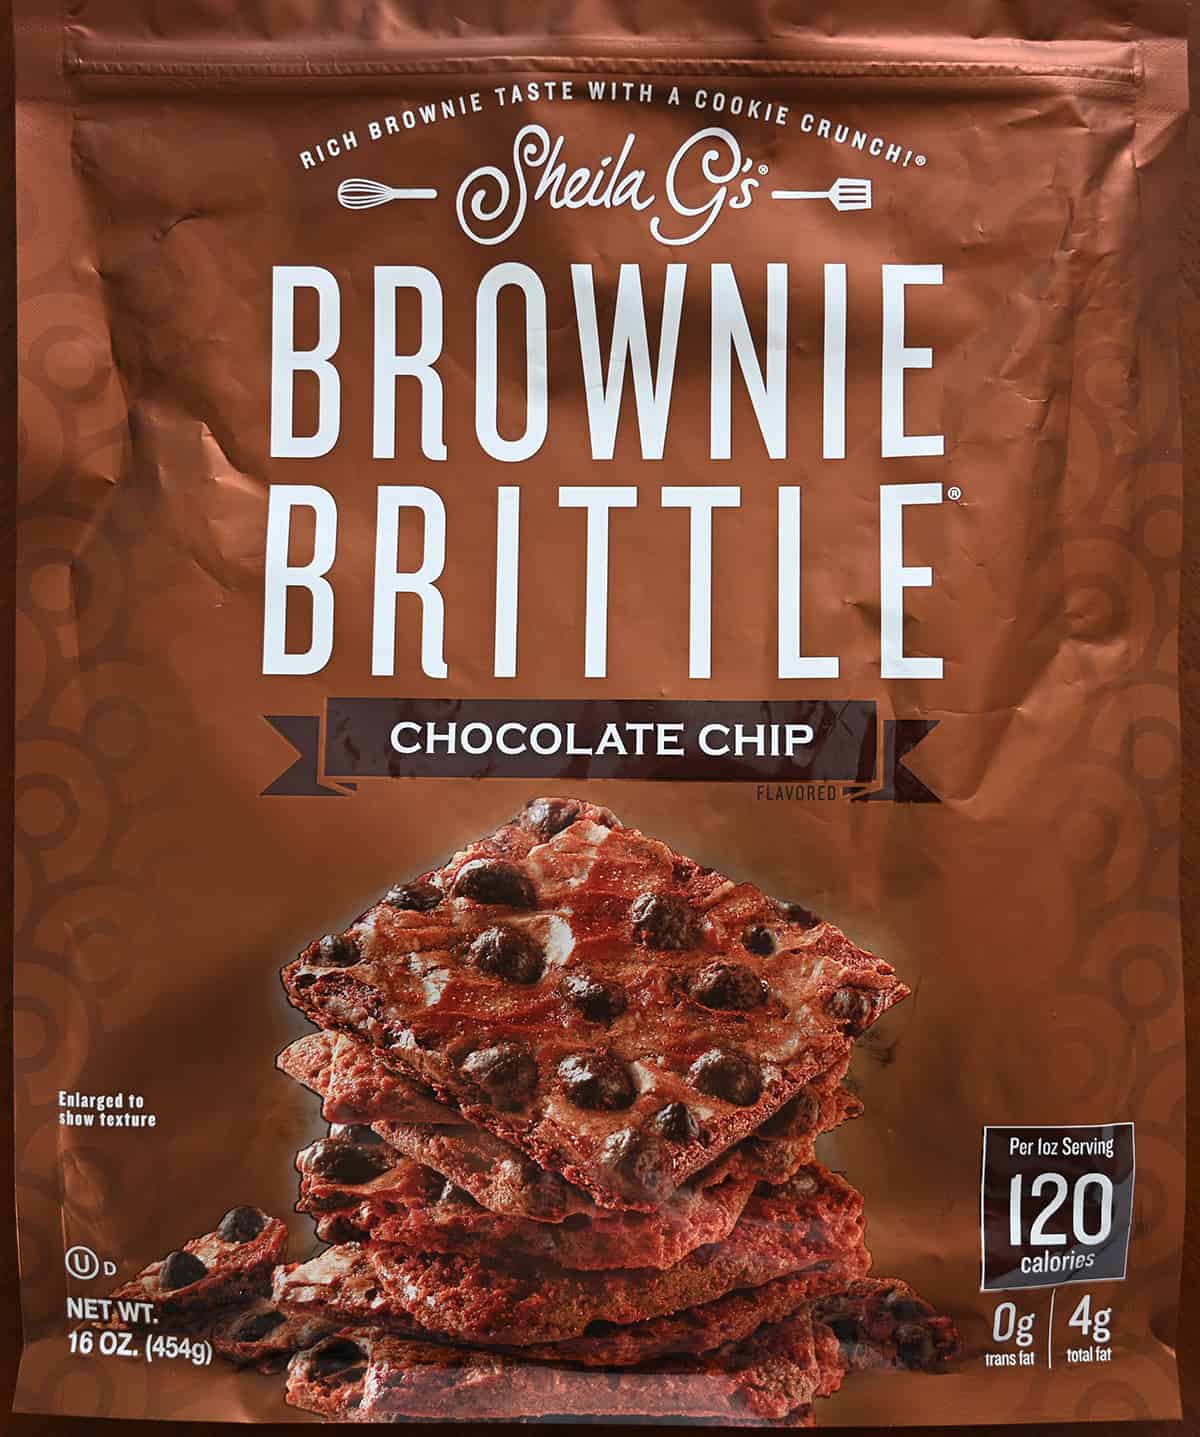 Closeup image of the front of the brownie brittle bag showing the size of the bag.